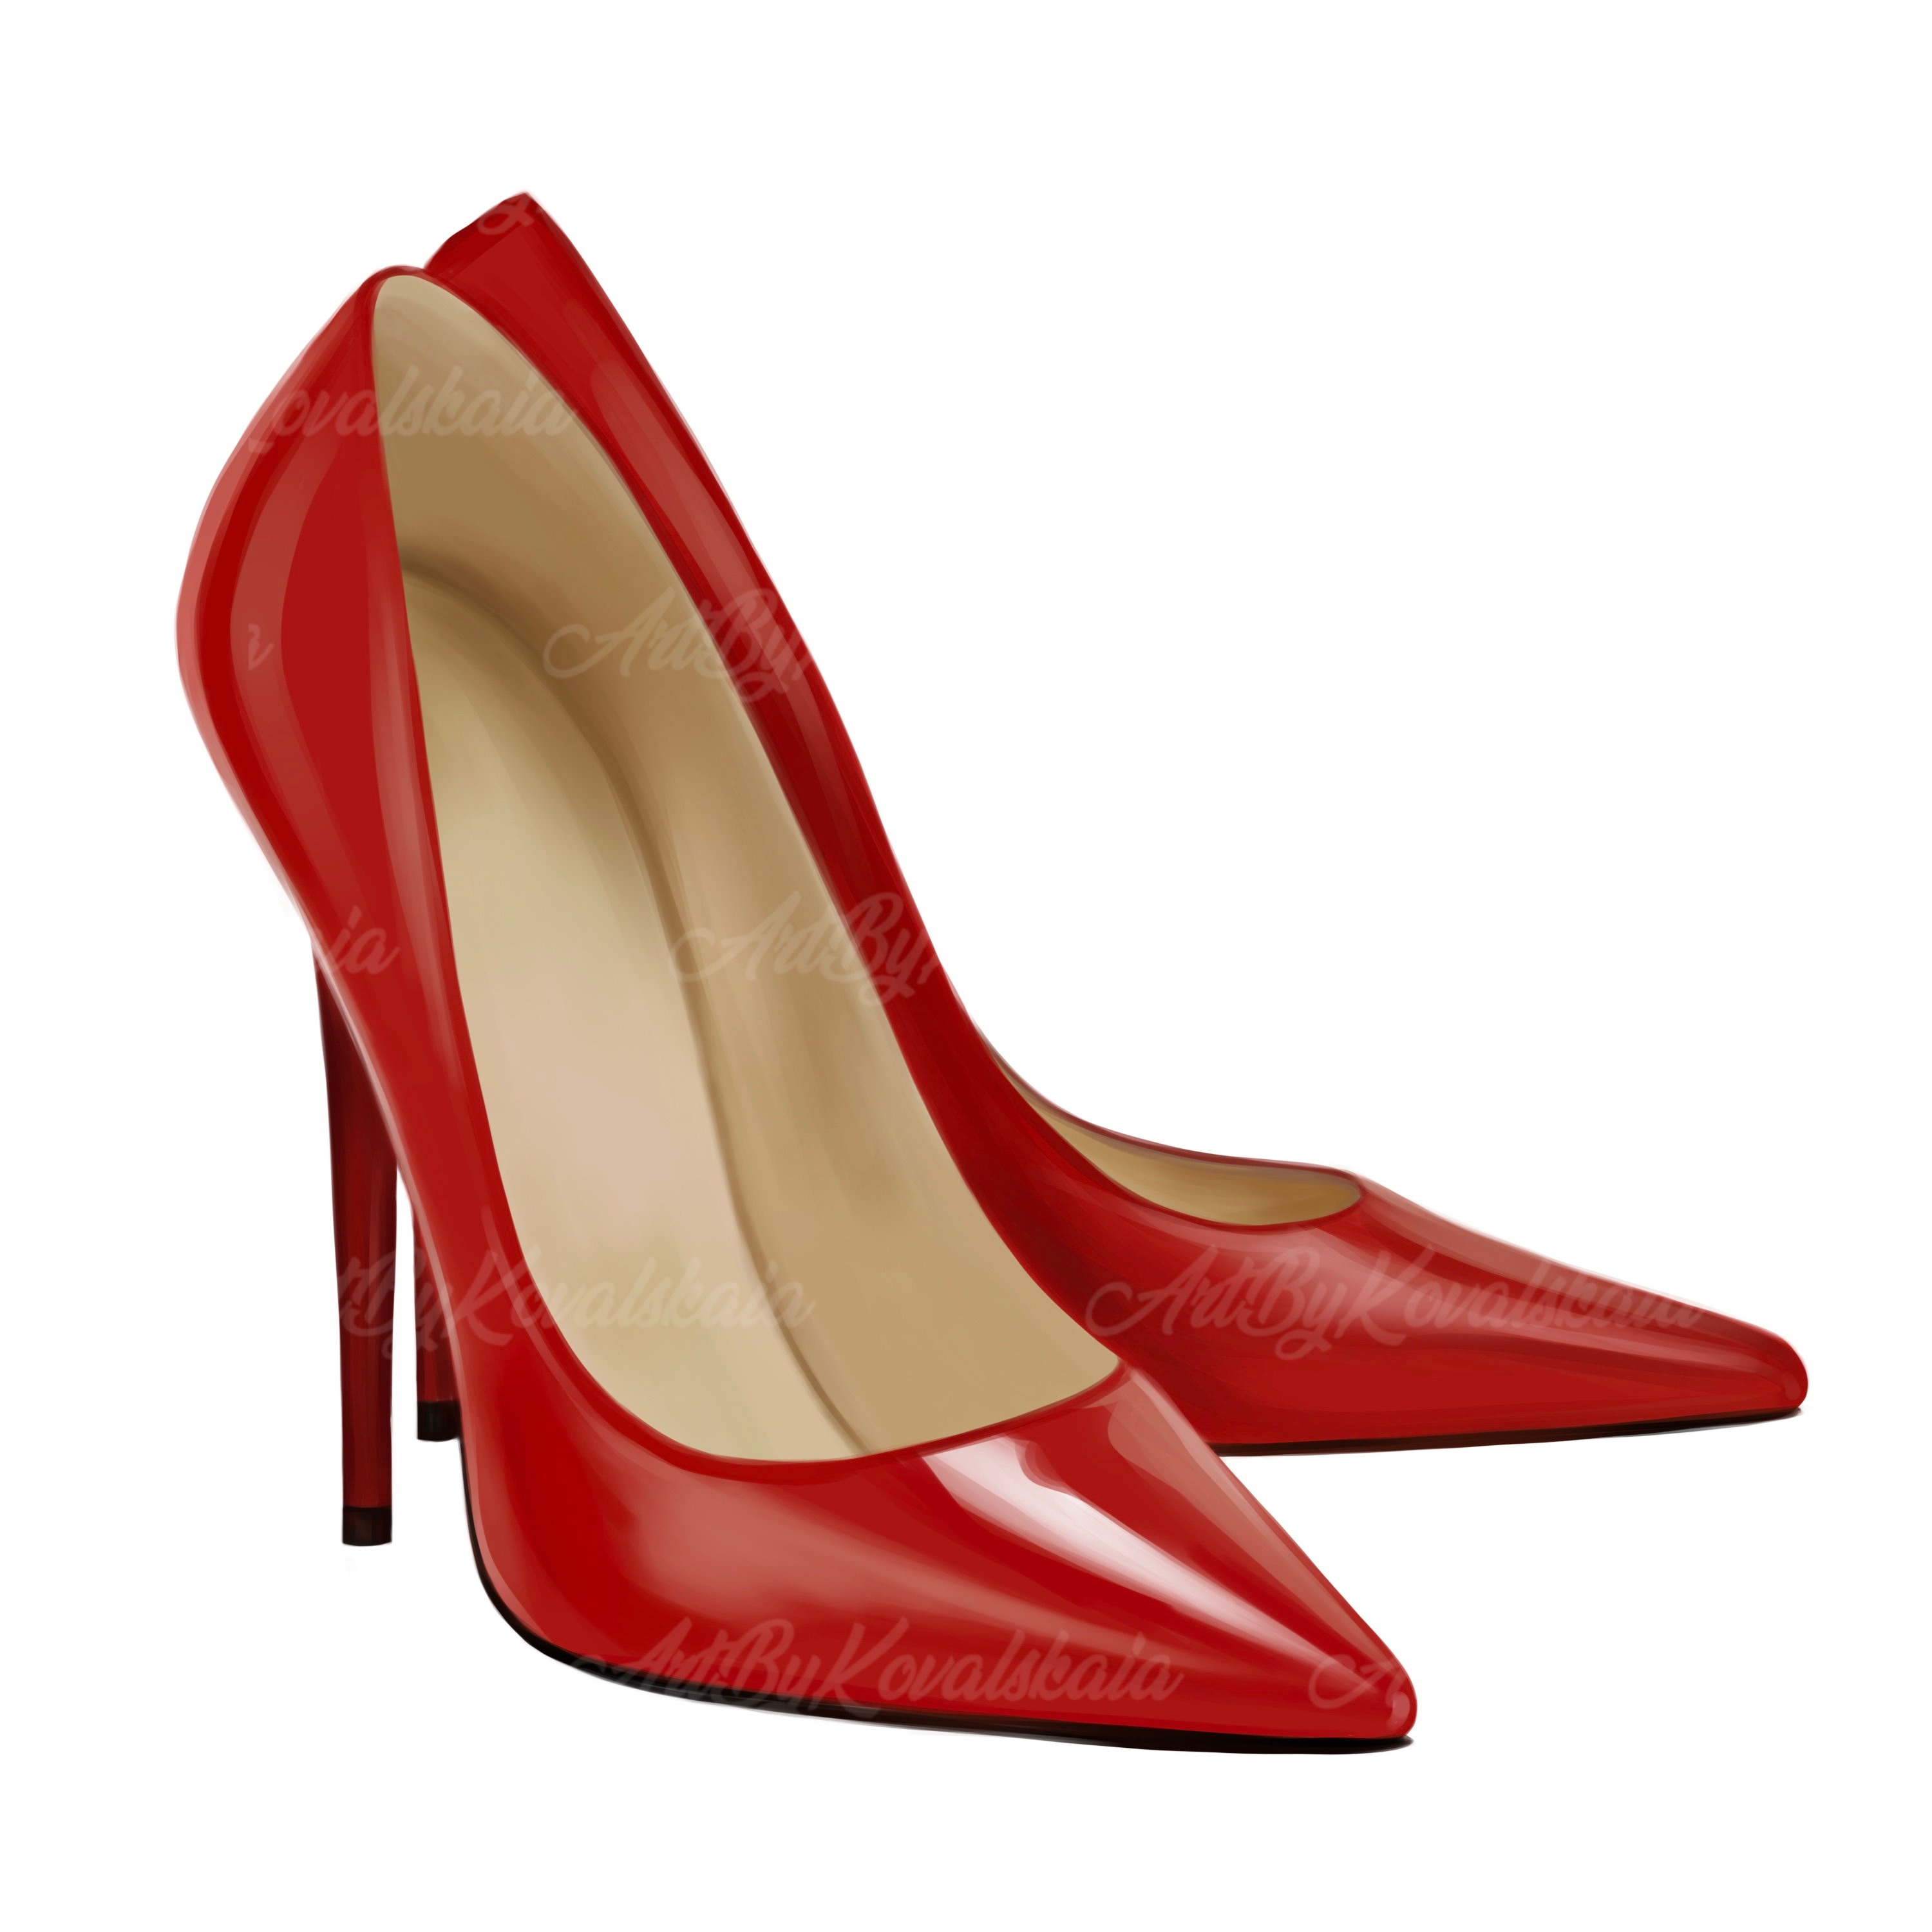 pictures of red high heels